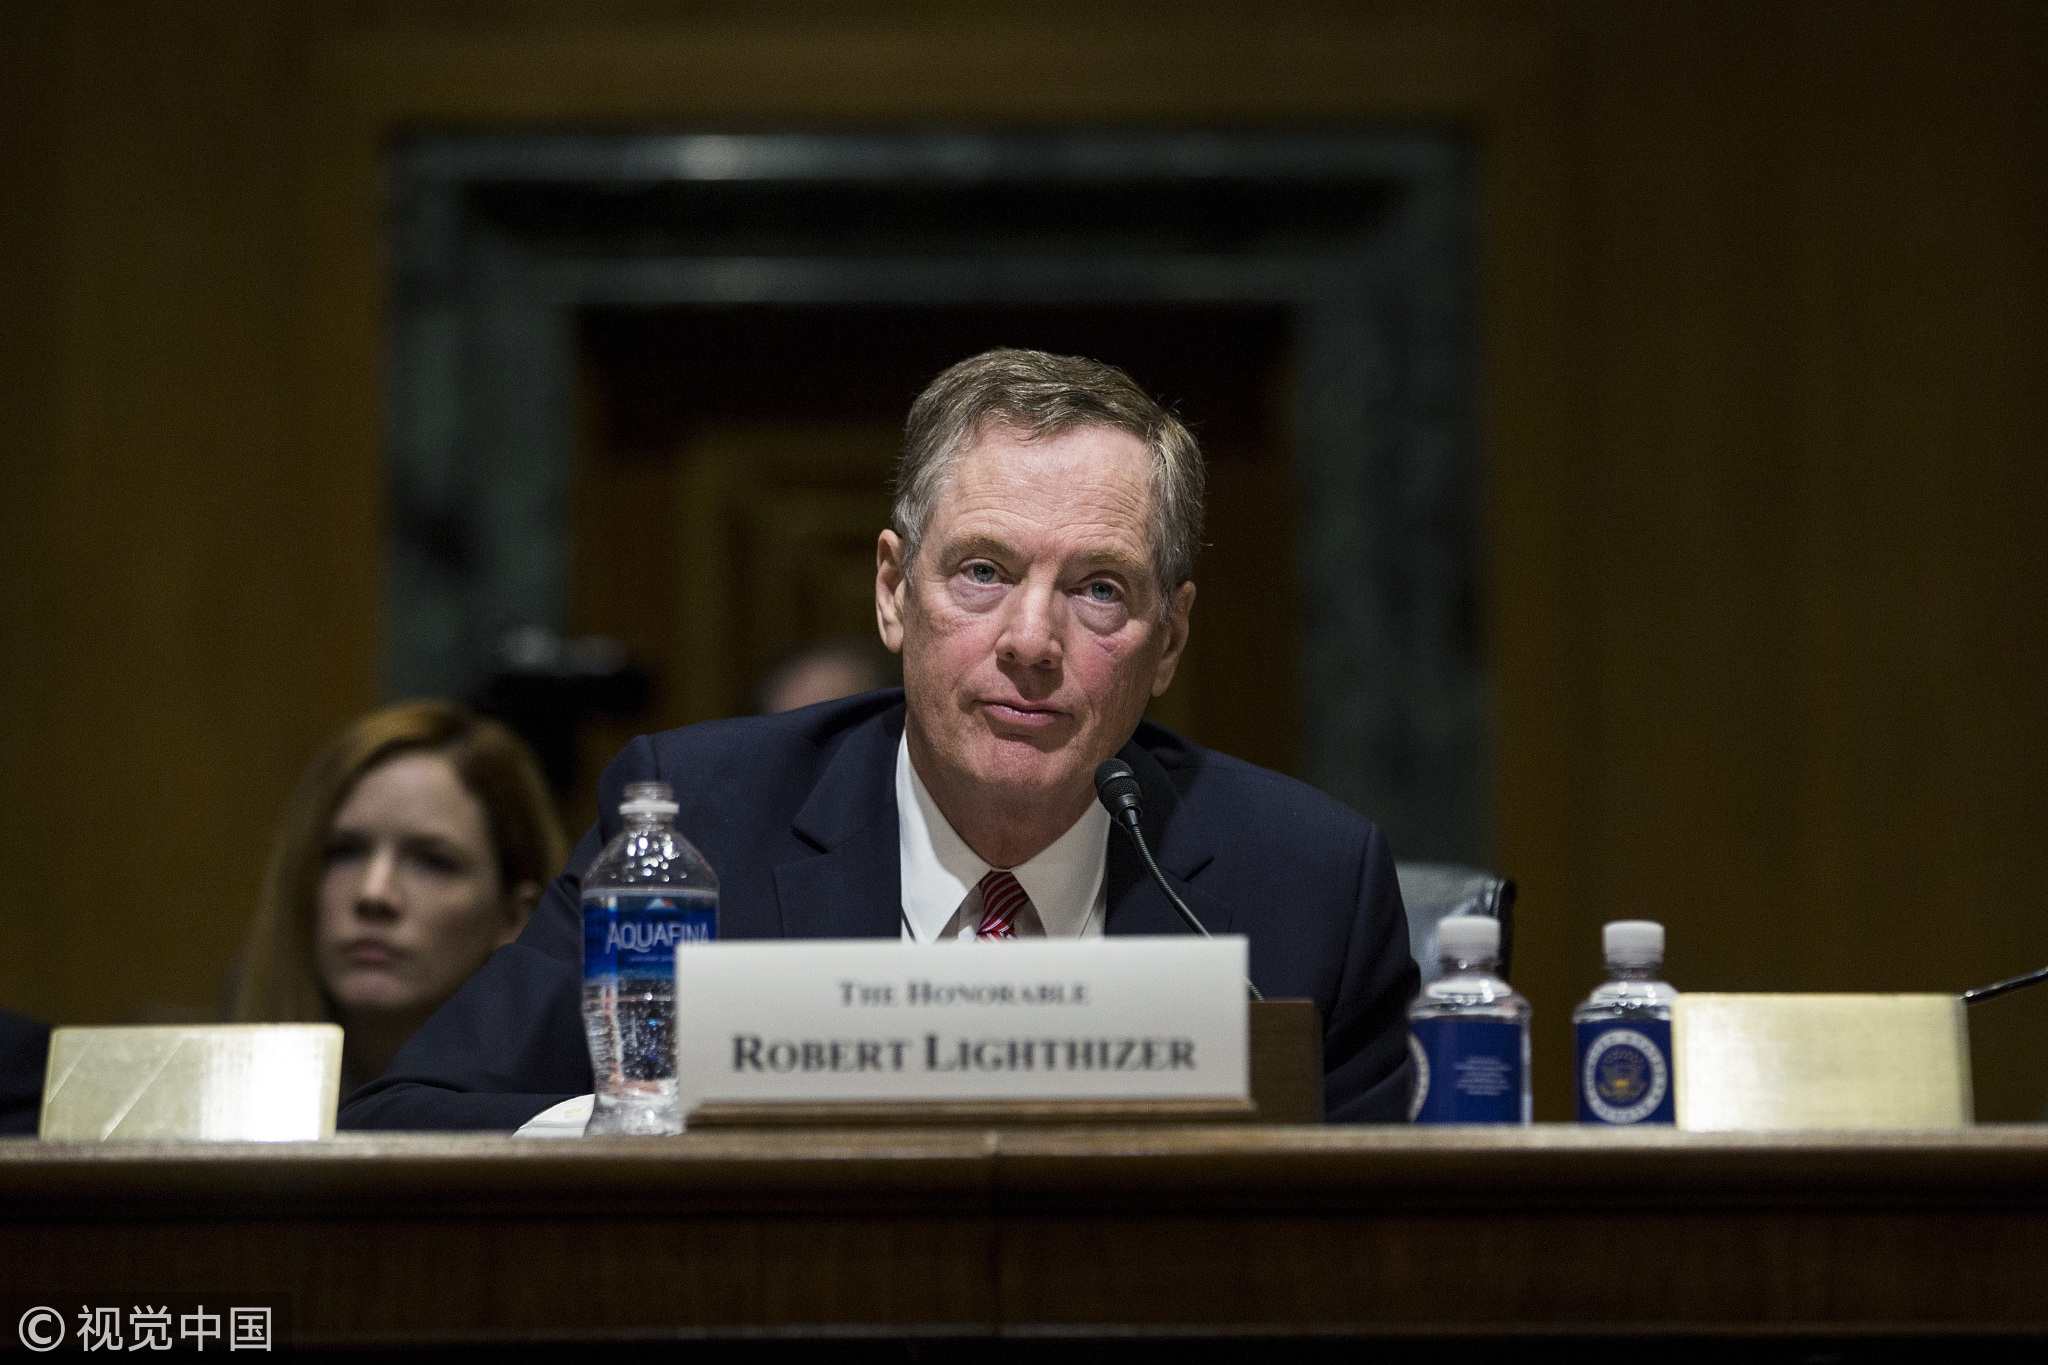 Robert Lighthizer, the US trade representative nominee for President Donald Trump, listens during a Senate Finance Committee confirmation hearing in Washington, D.C., US on Tuesday, March 14, 2017. [Photo: VCG]